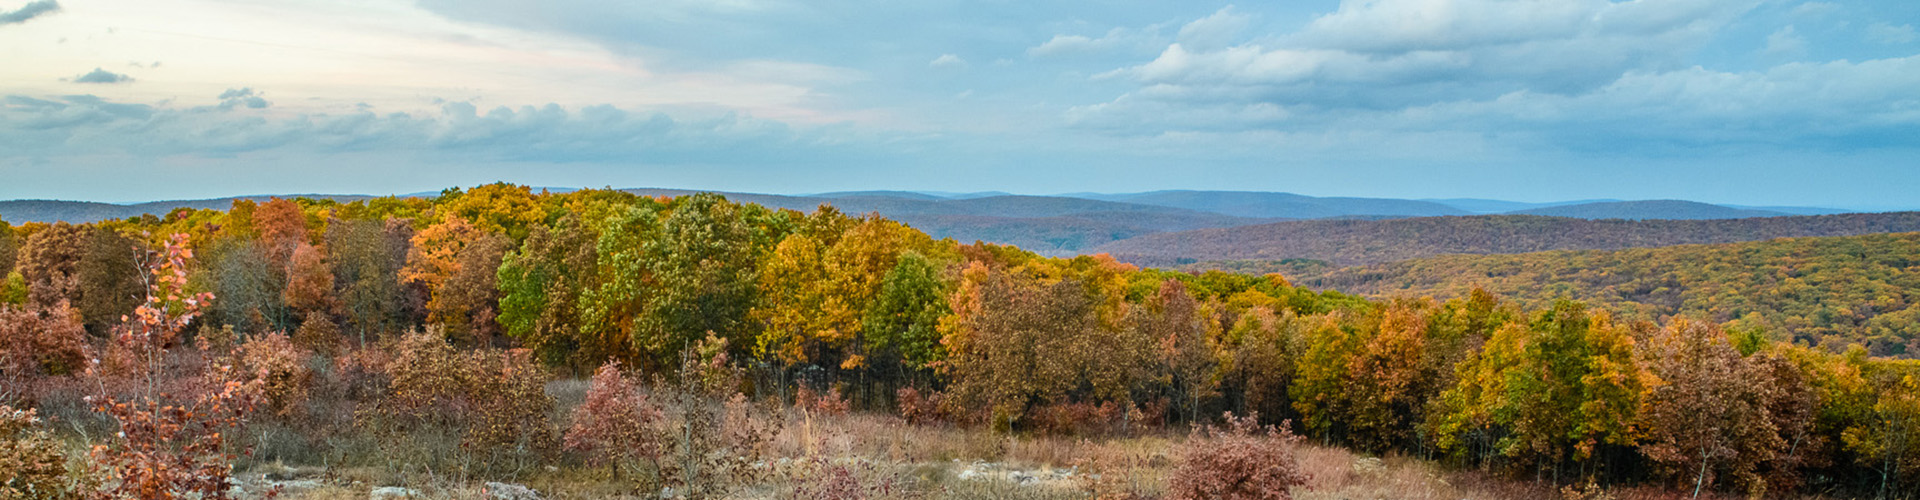 Trees with yellow and orange leaves dot the horizon of the Ozark mountains.